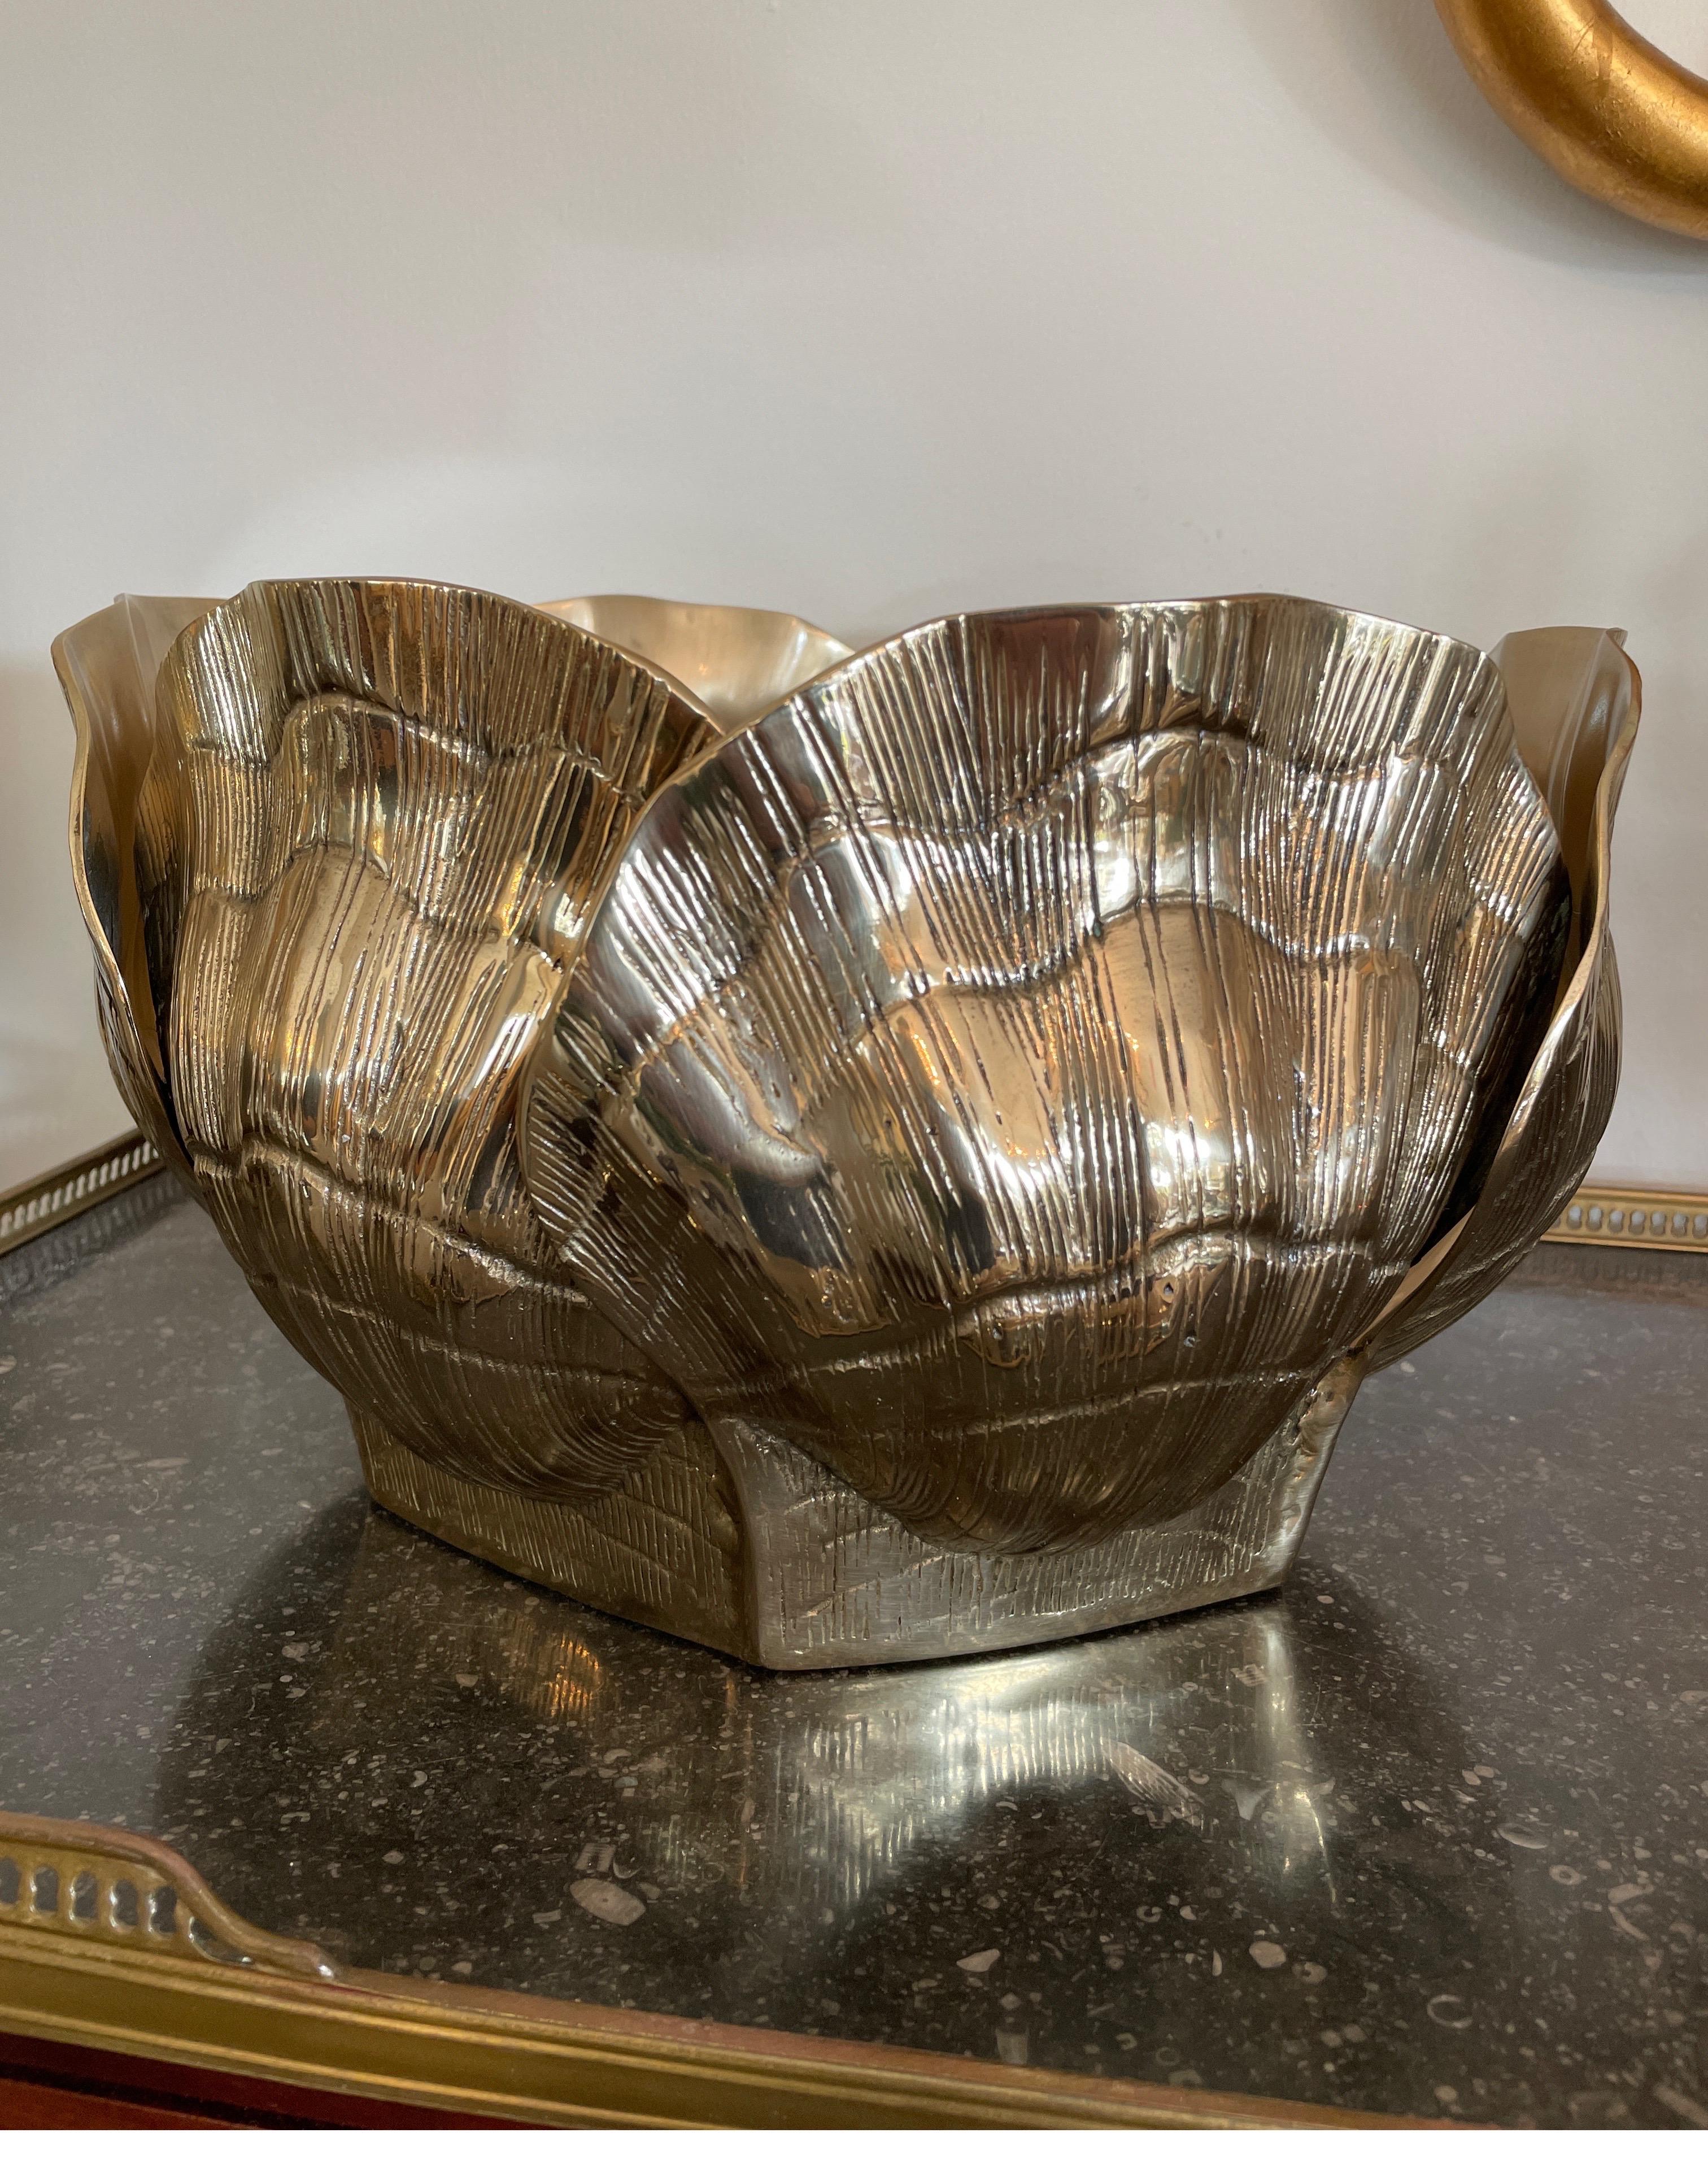 Large brass shell cache pot for your favorite arrangement or plant. Beautiful polished finish.